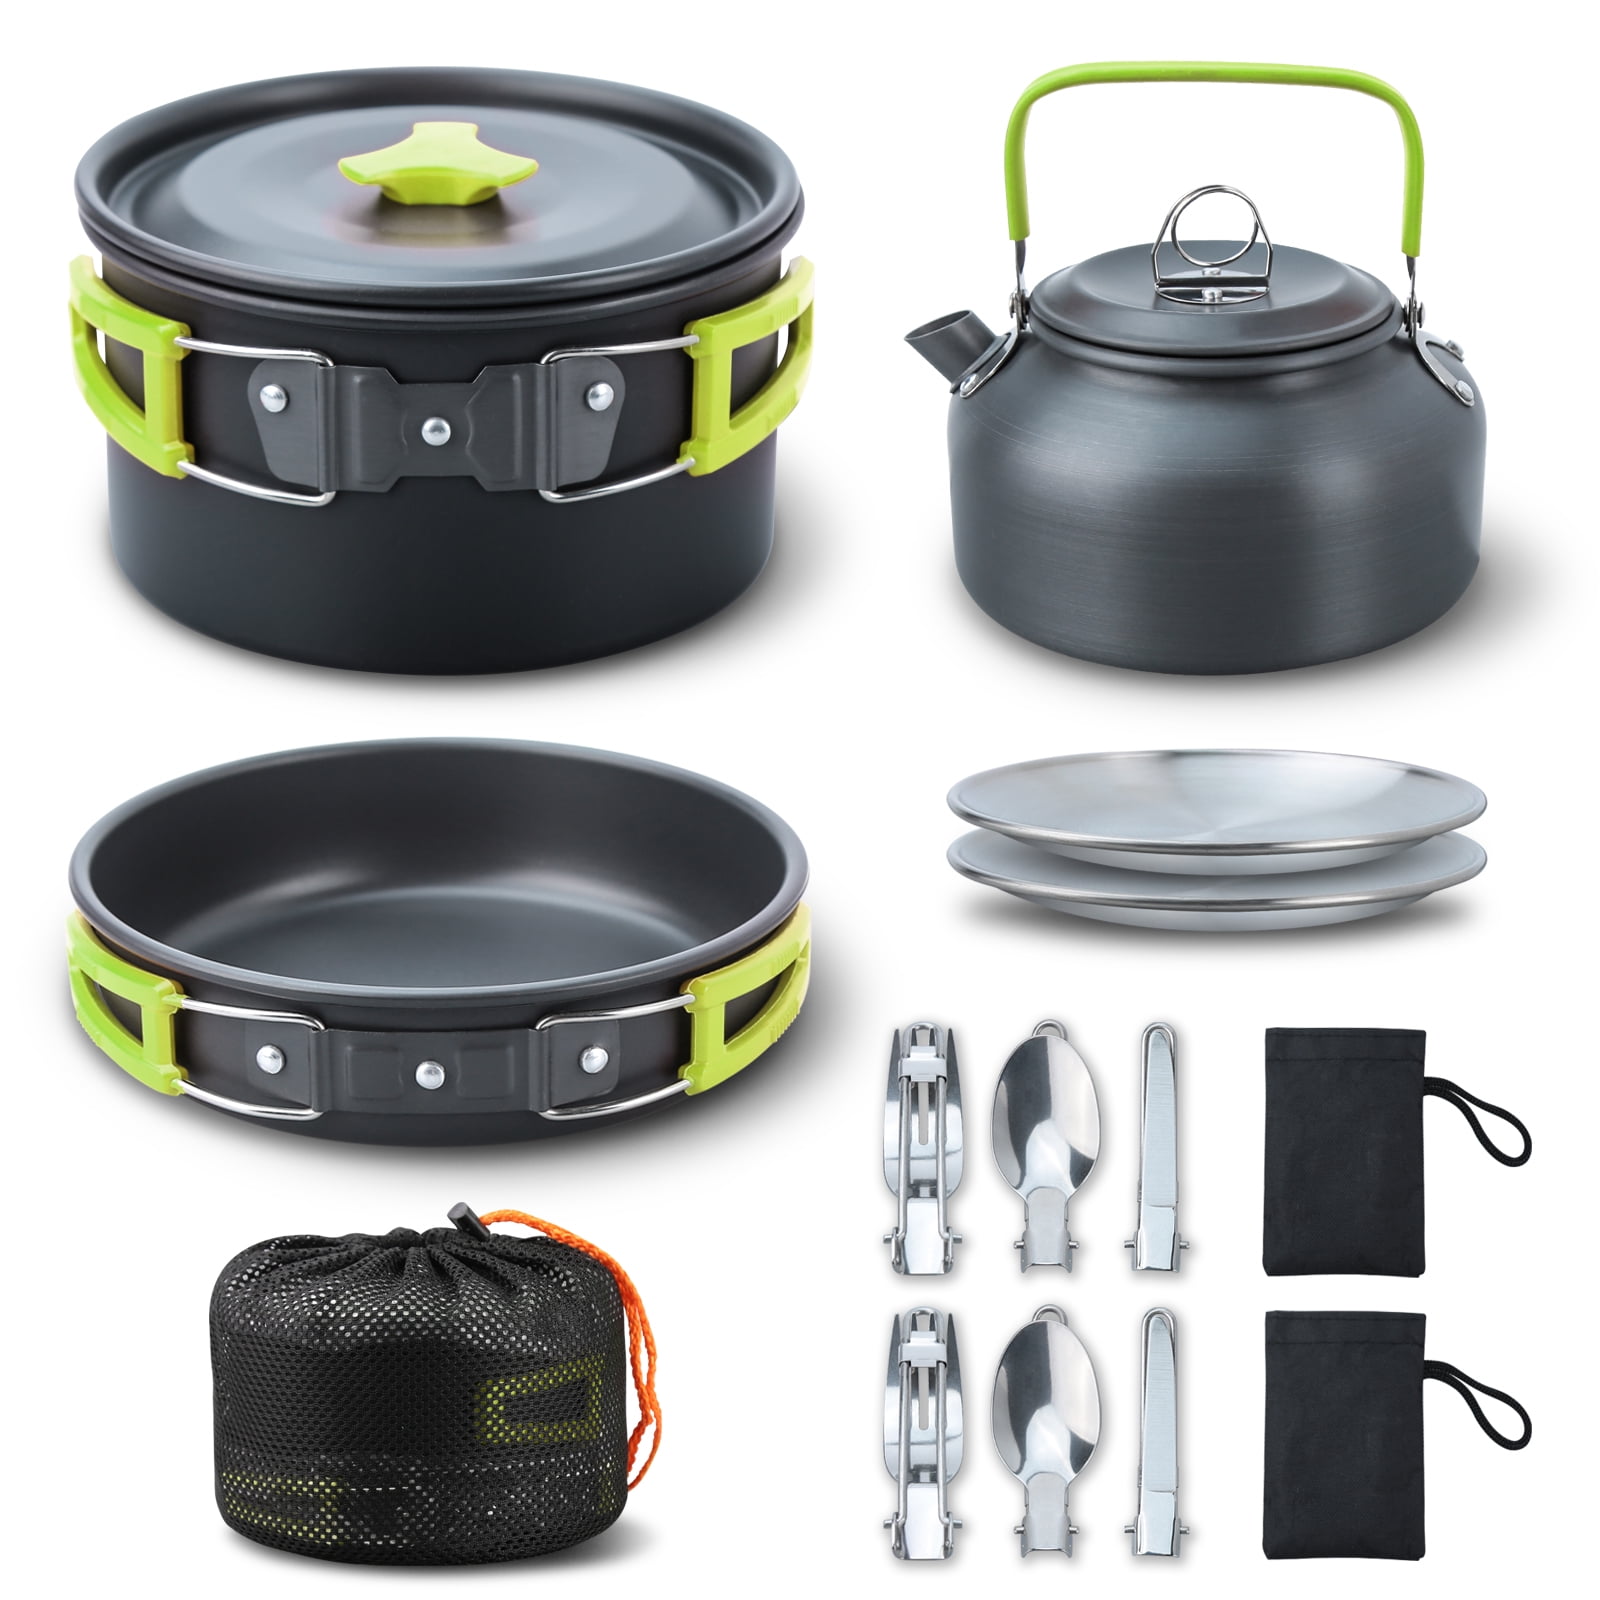 Camping-oven Omnia 3-parts, Camping Cook Set, Camping Pans, Camping  Cooking Equipment, Camping Tableware, 12v Appliances for Camping, Camping  Accessories